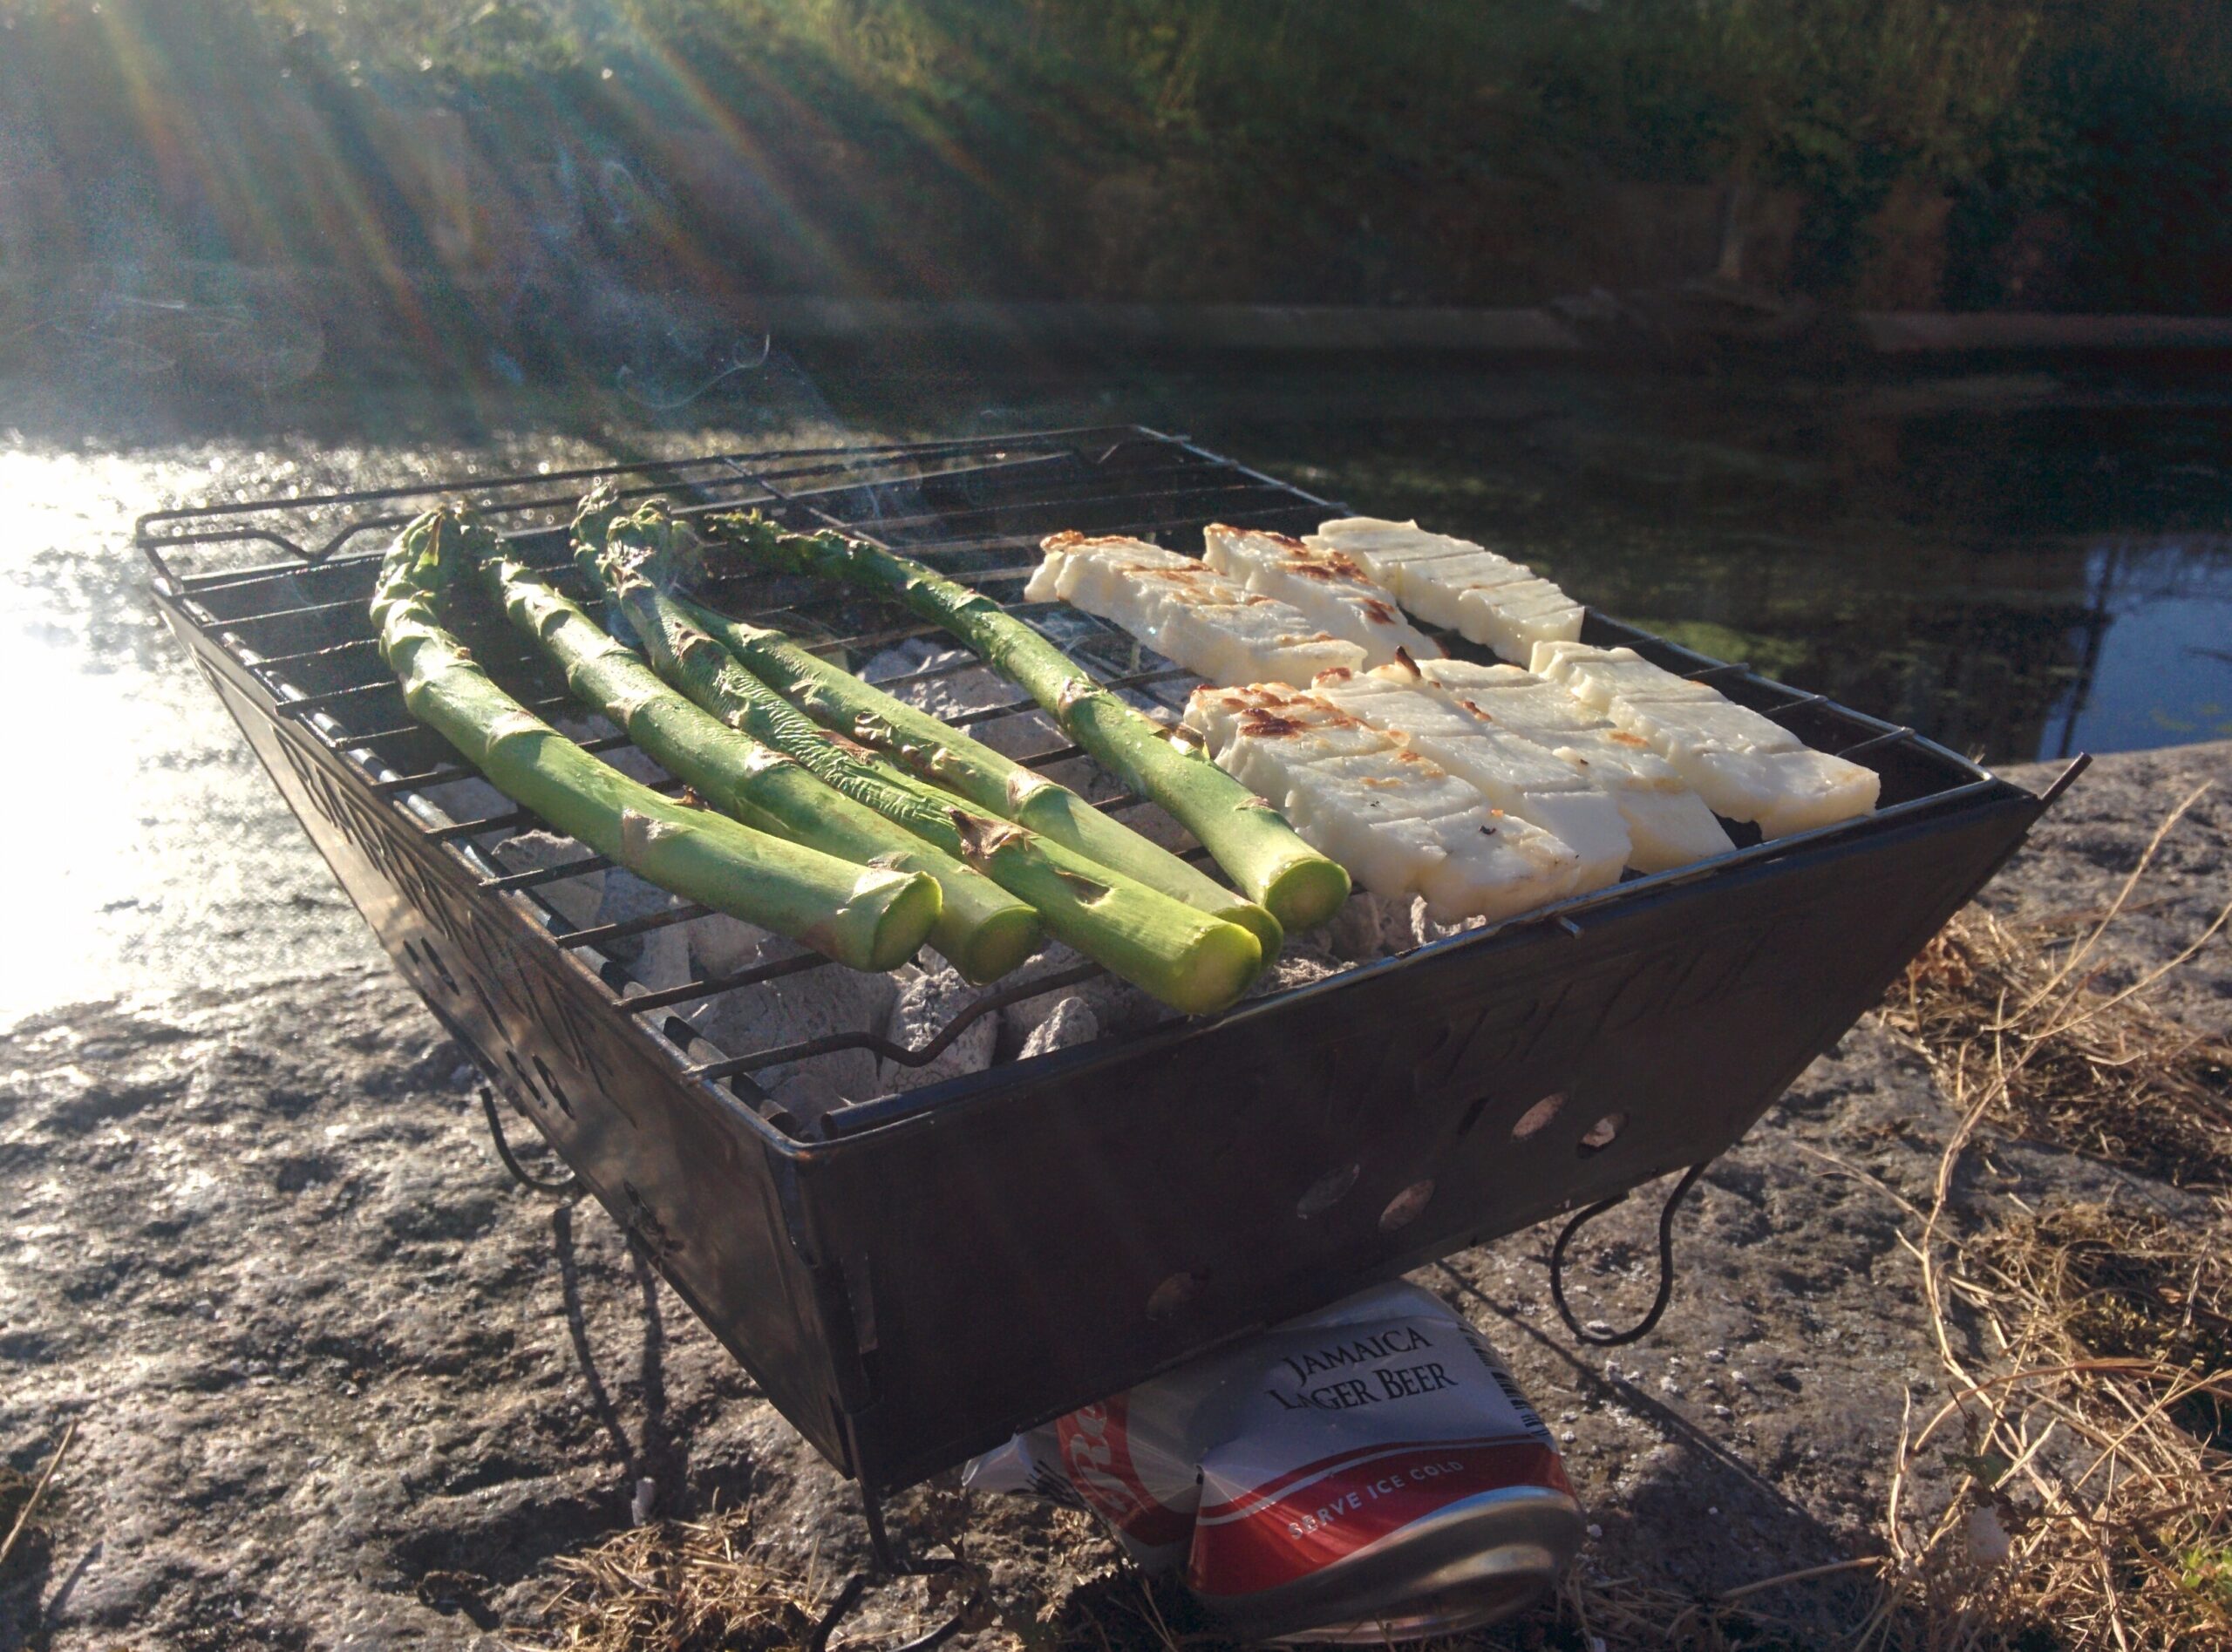 A photo of our BBQ by the canal in East End London. It is a sunny day. The BBQ is on the edge of the canal.